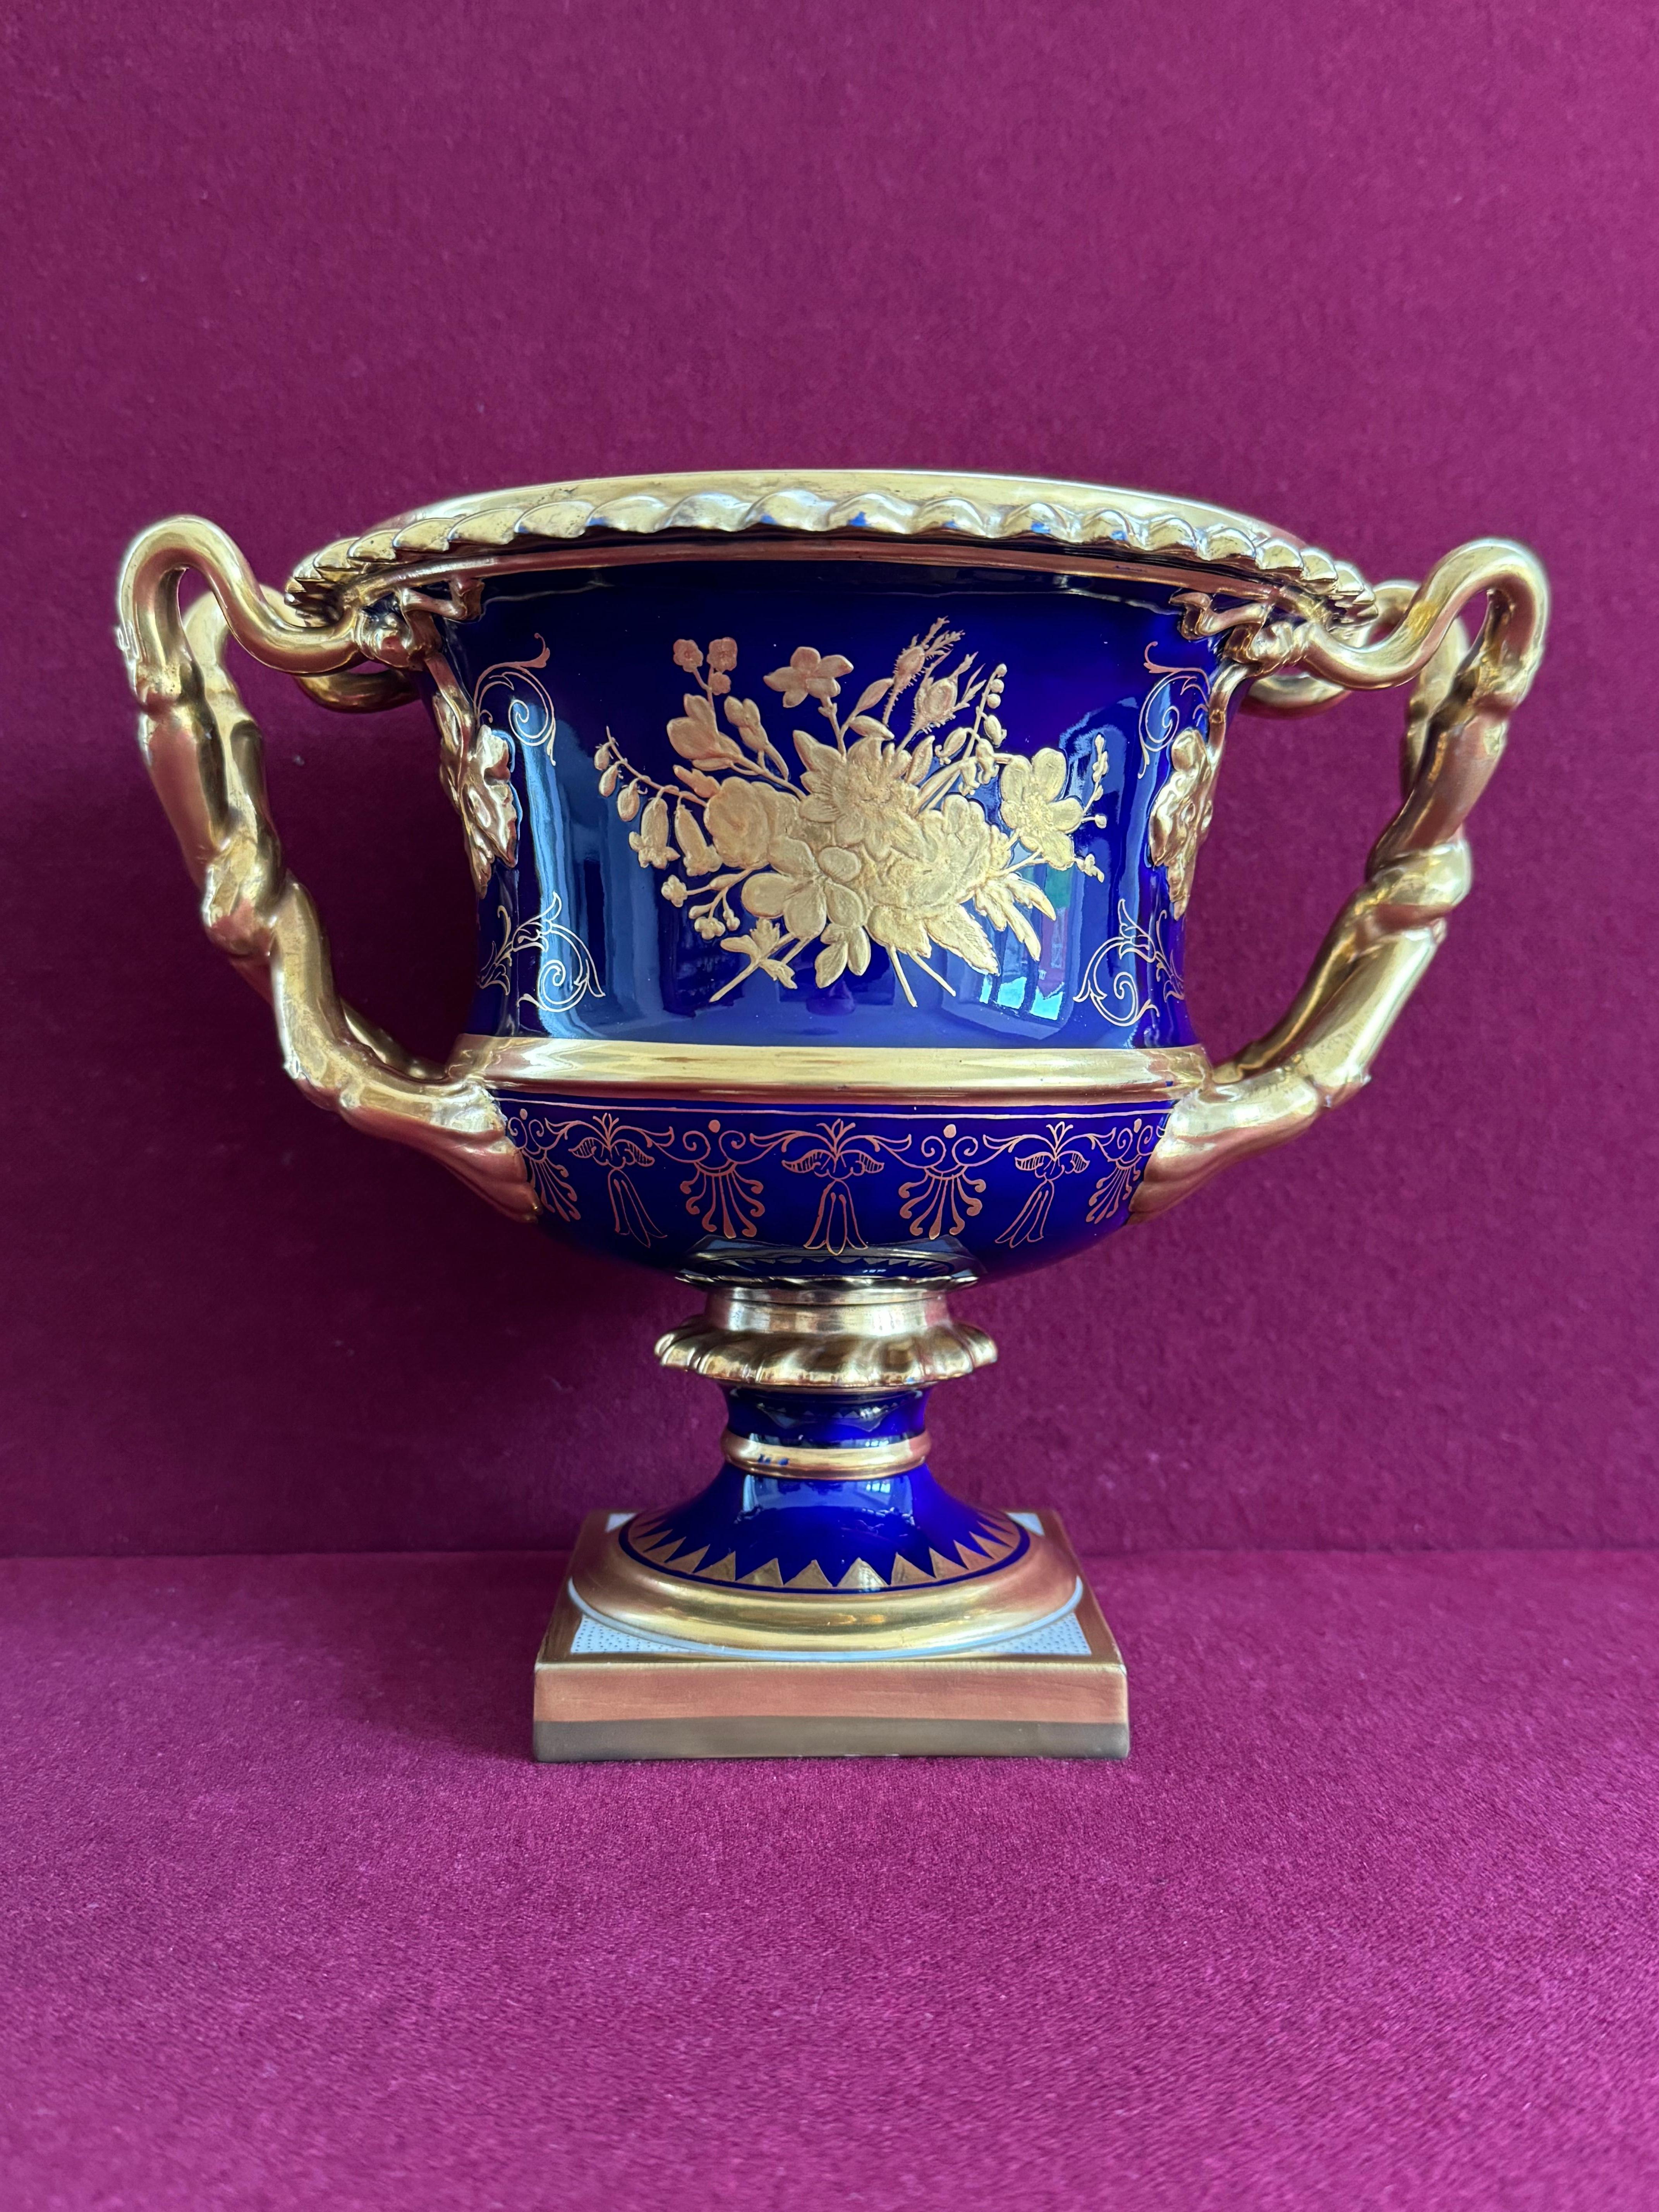 A Flight, Barr And Barr Worcester 'Warwick' Vase, Circa 1815-20. Decorated with a gilt gadrooned rim, gilt twisted double vine stem and leaf handles, and gilded floral and scroll decorative work reserved on a deep cobalt blue ground. Raised on a